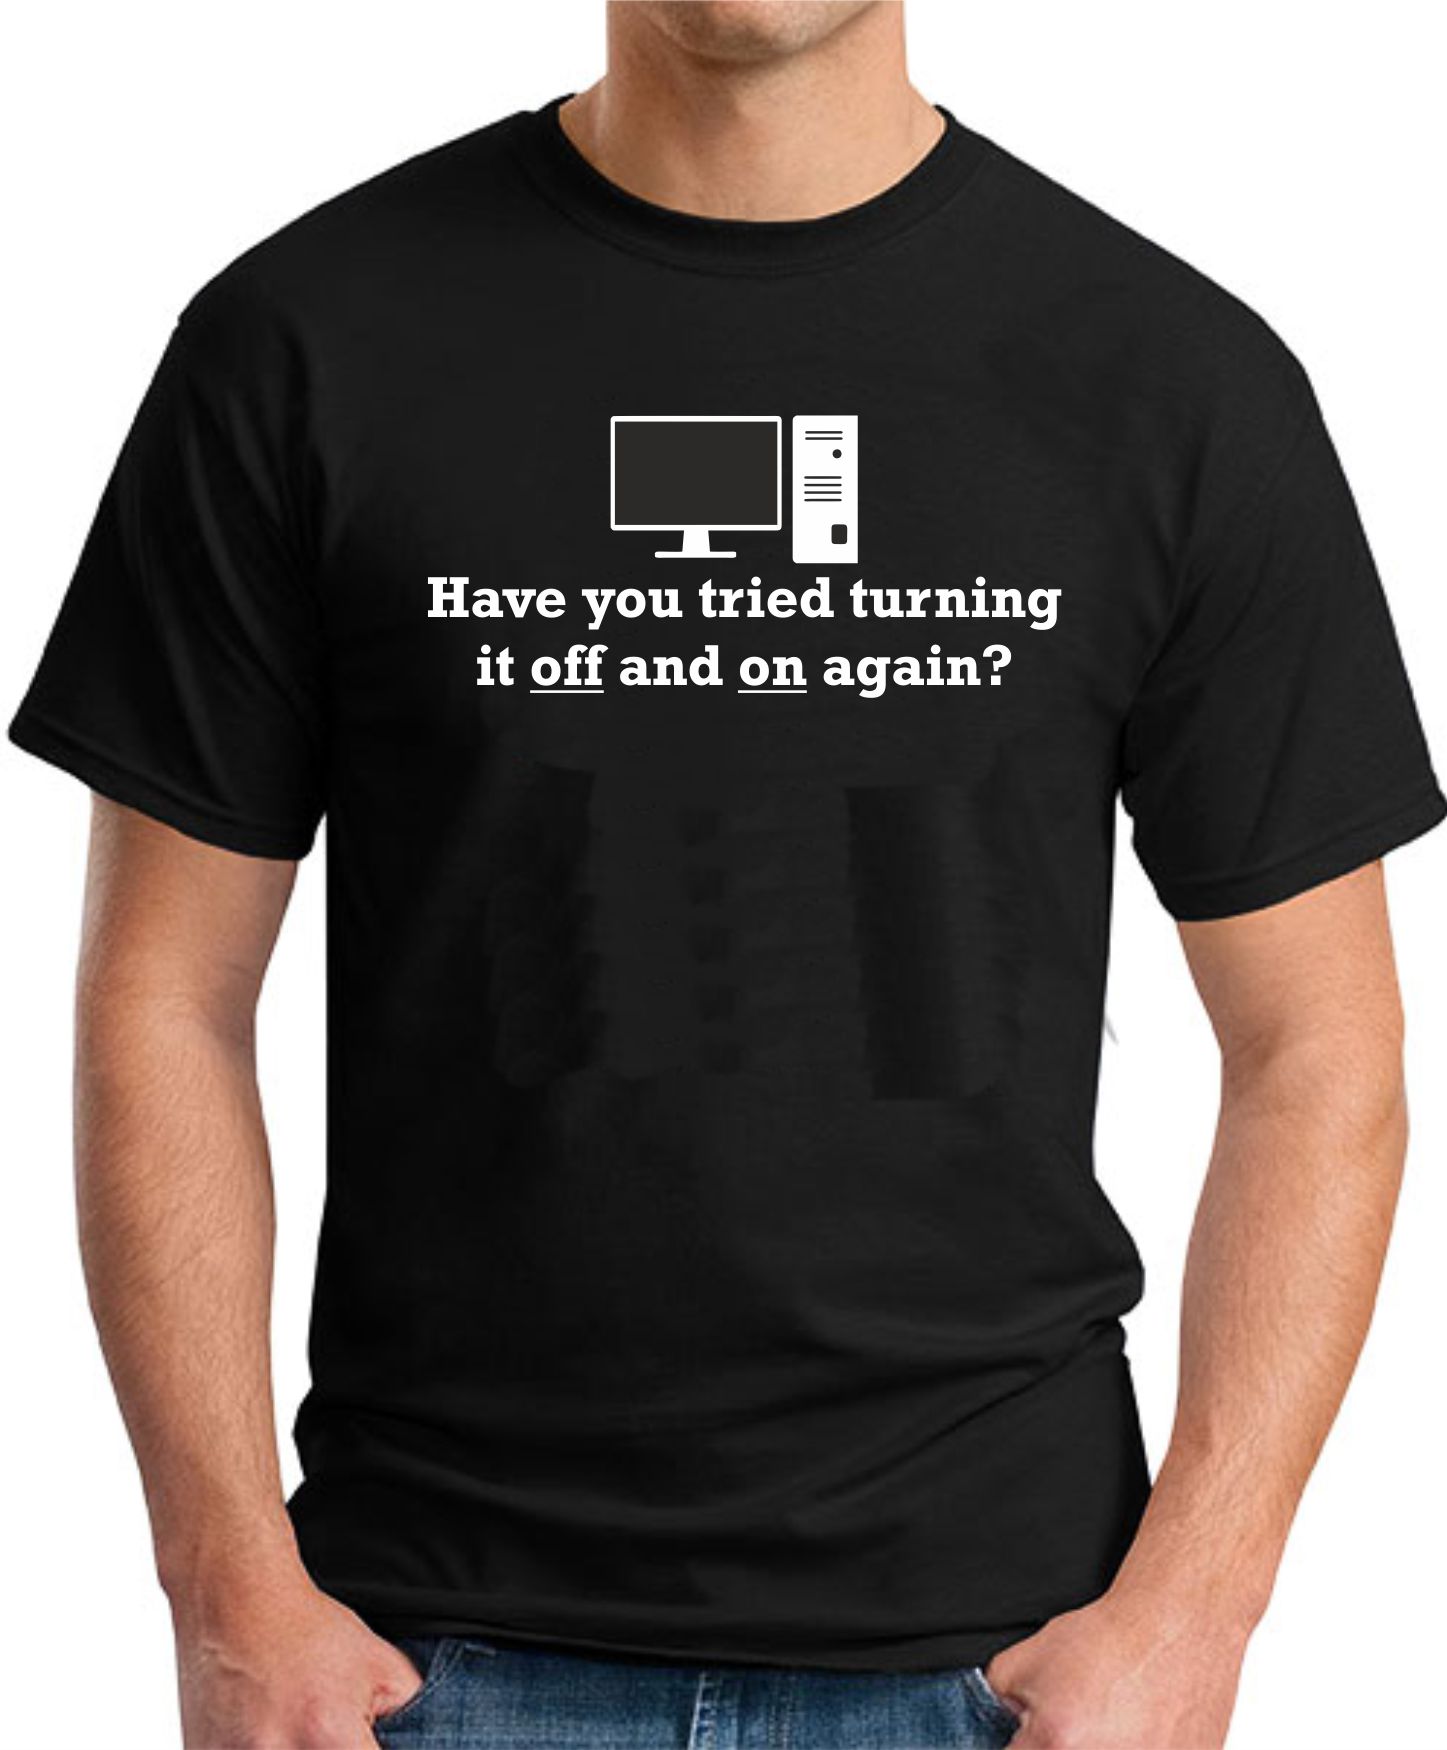 Reality Glitch Men's Have You Tried Turning It Off and On Again T Shirt.